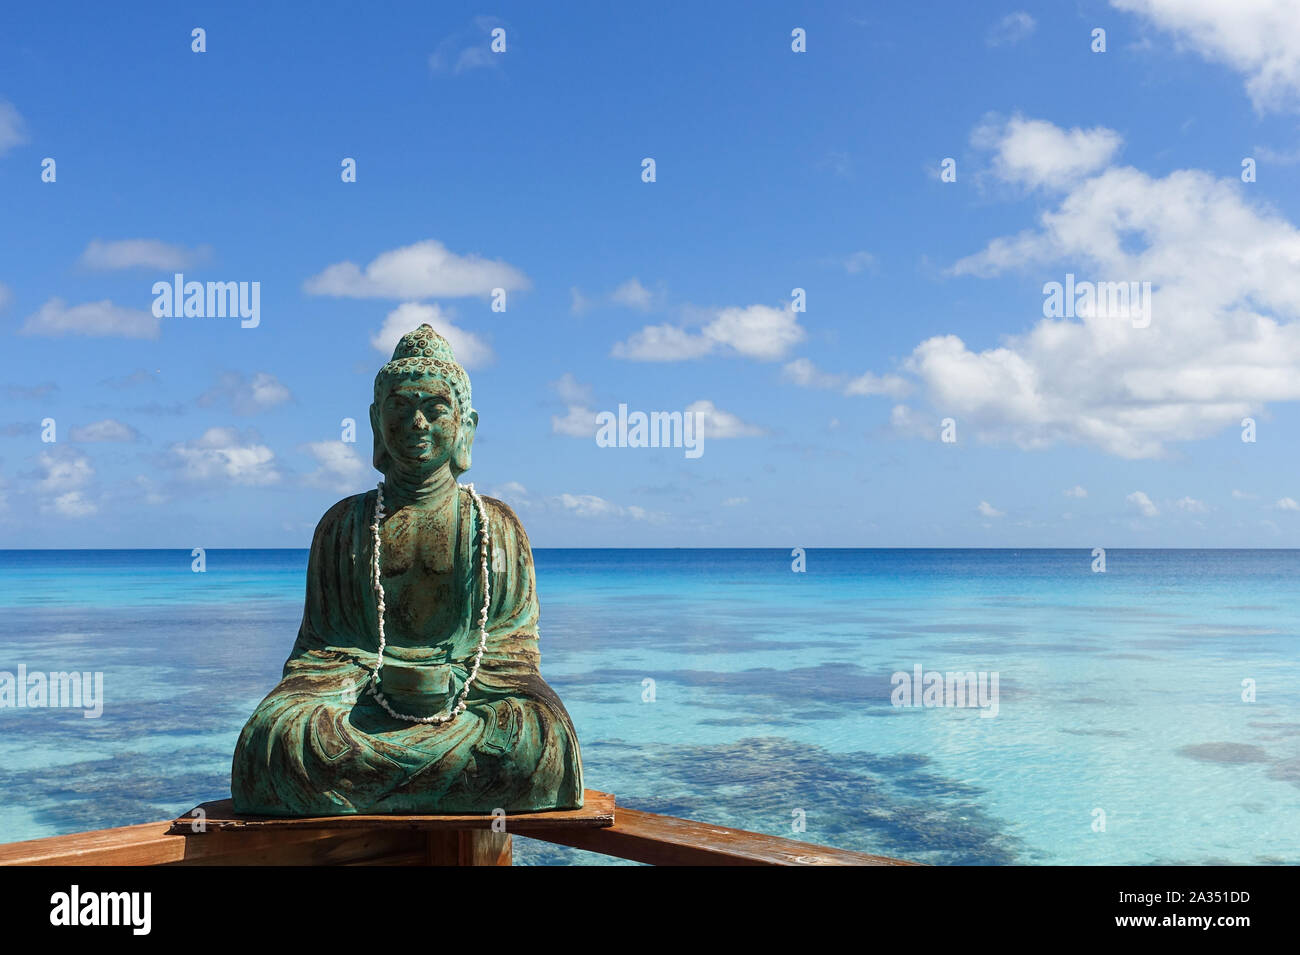 A sculpture of Buddha rests on a railing overlooking a tropical lagoon on the island of Fakarava in French Polynesia Stock Photo